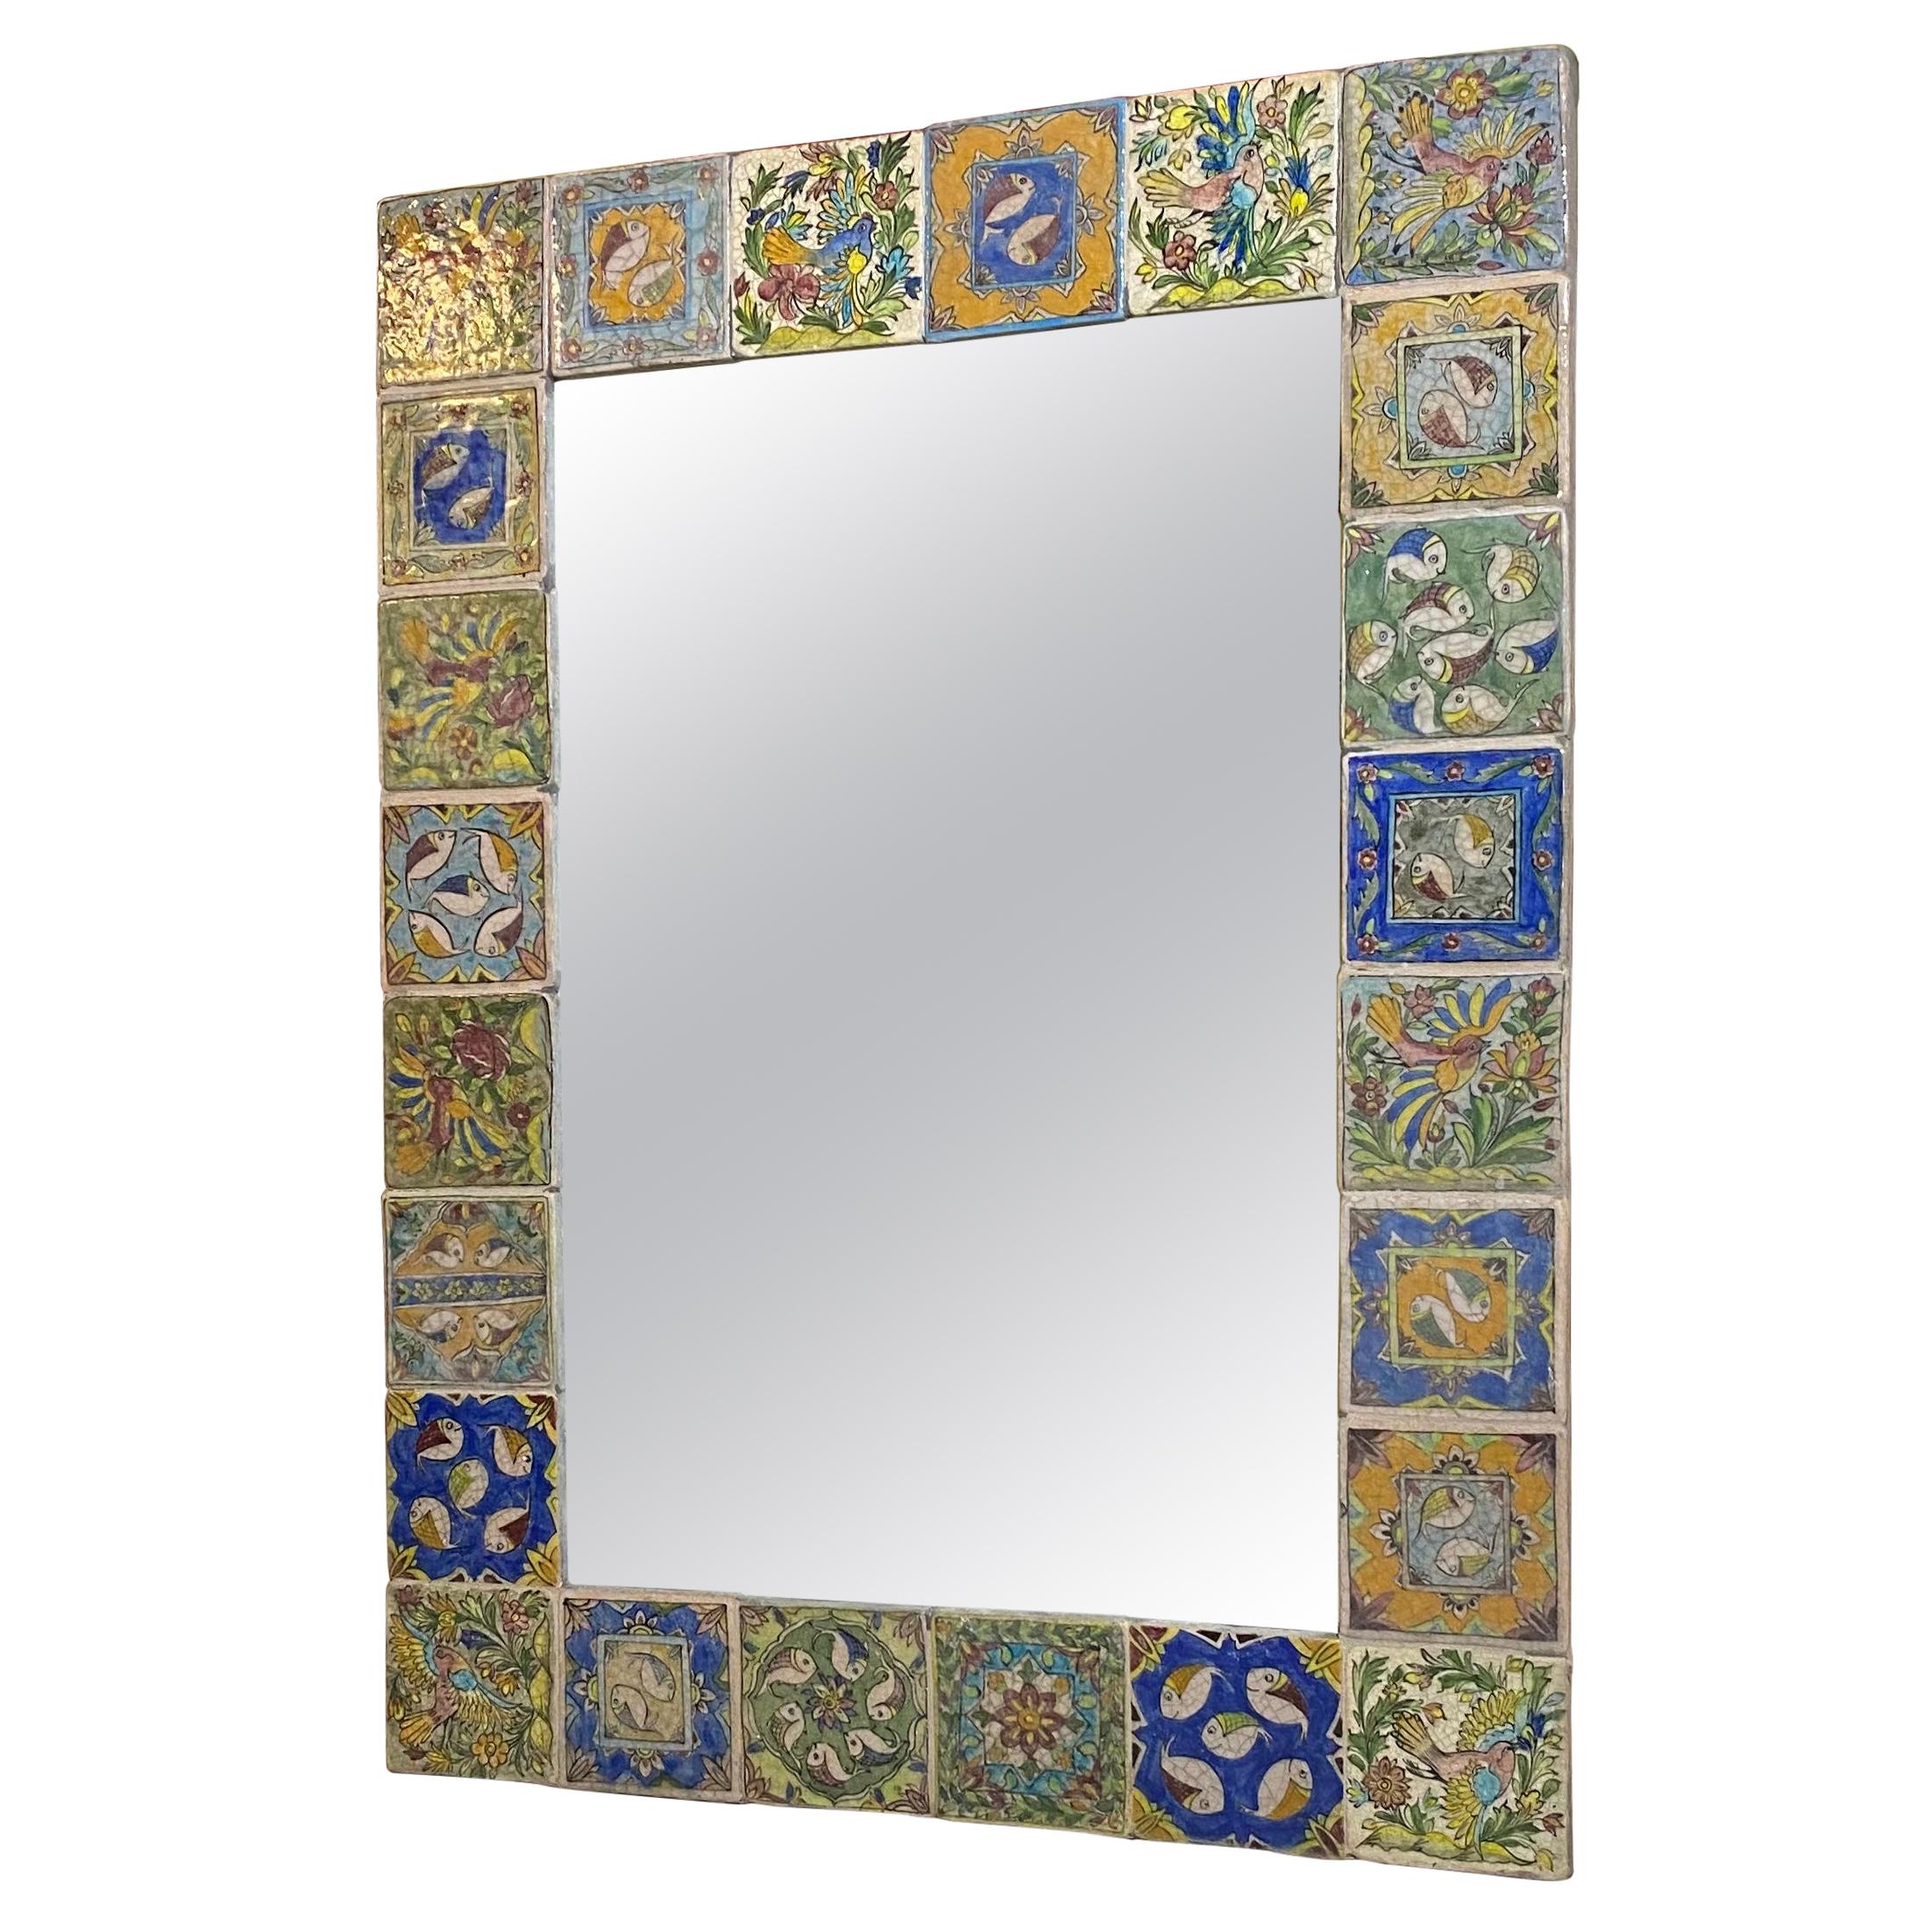 One of a Kind Large Hand Painted Ceramic Tile Mirror